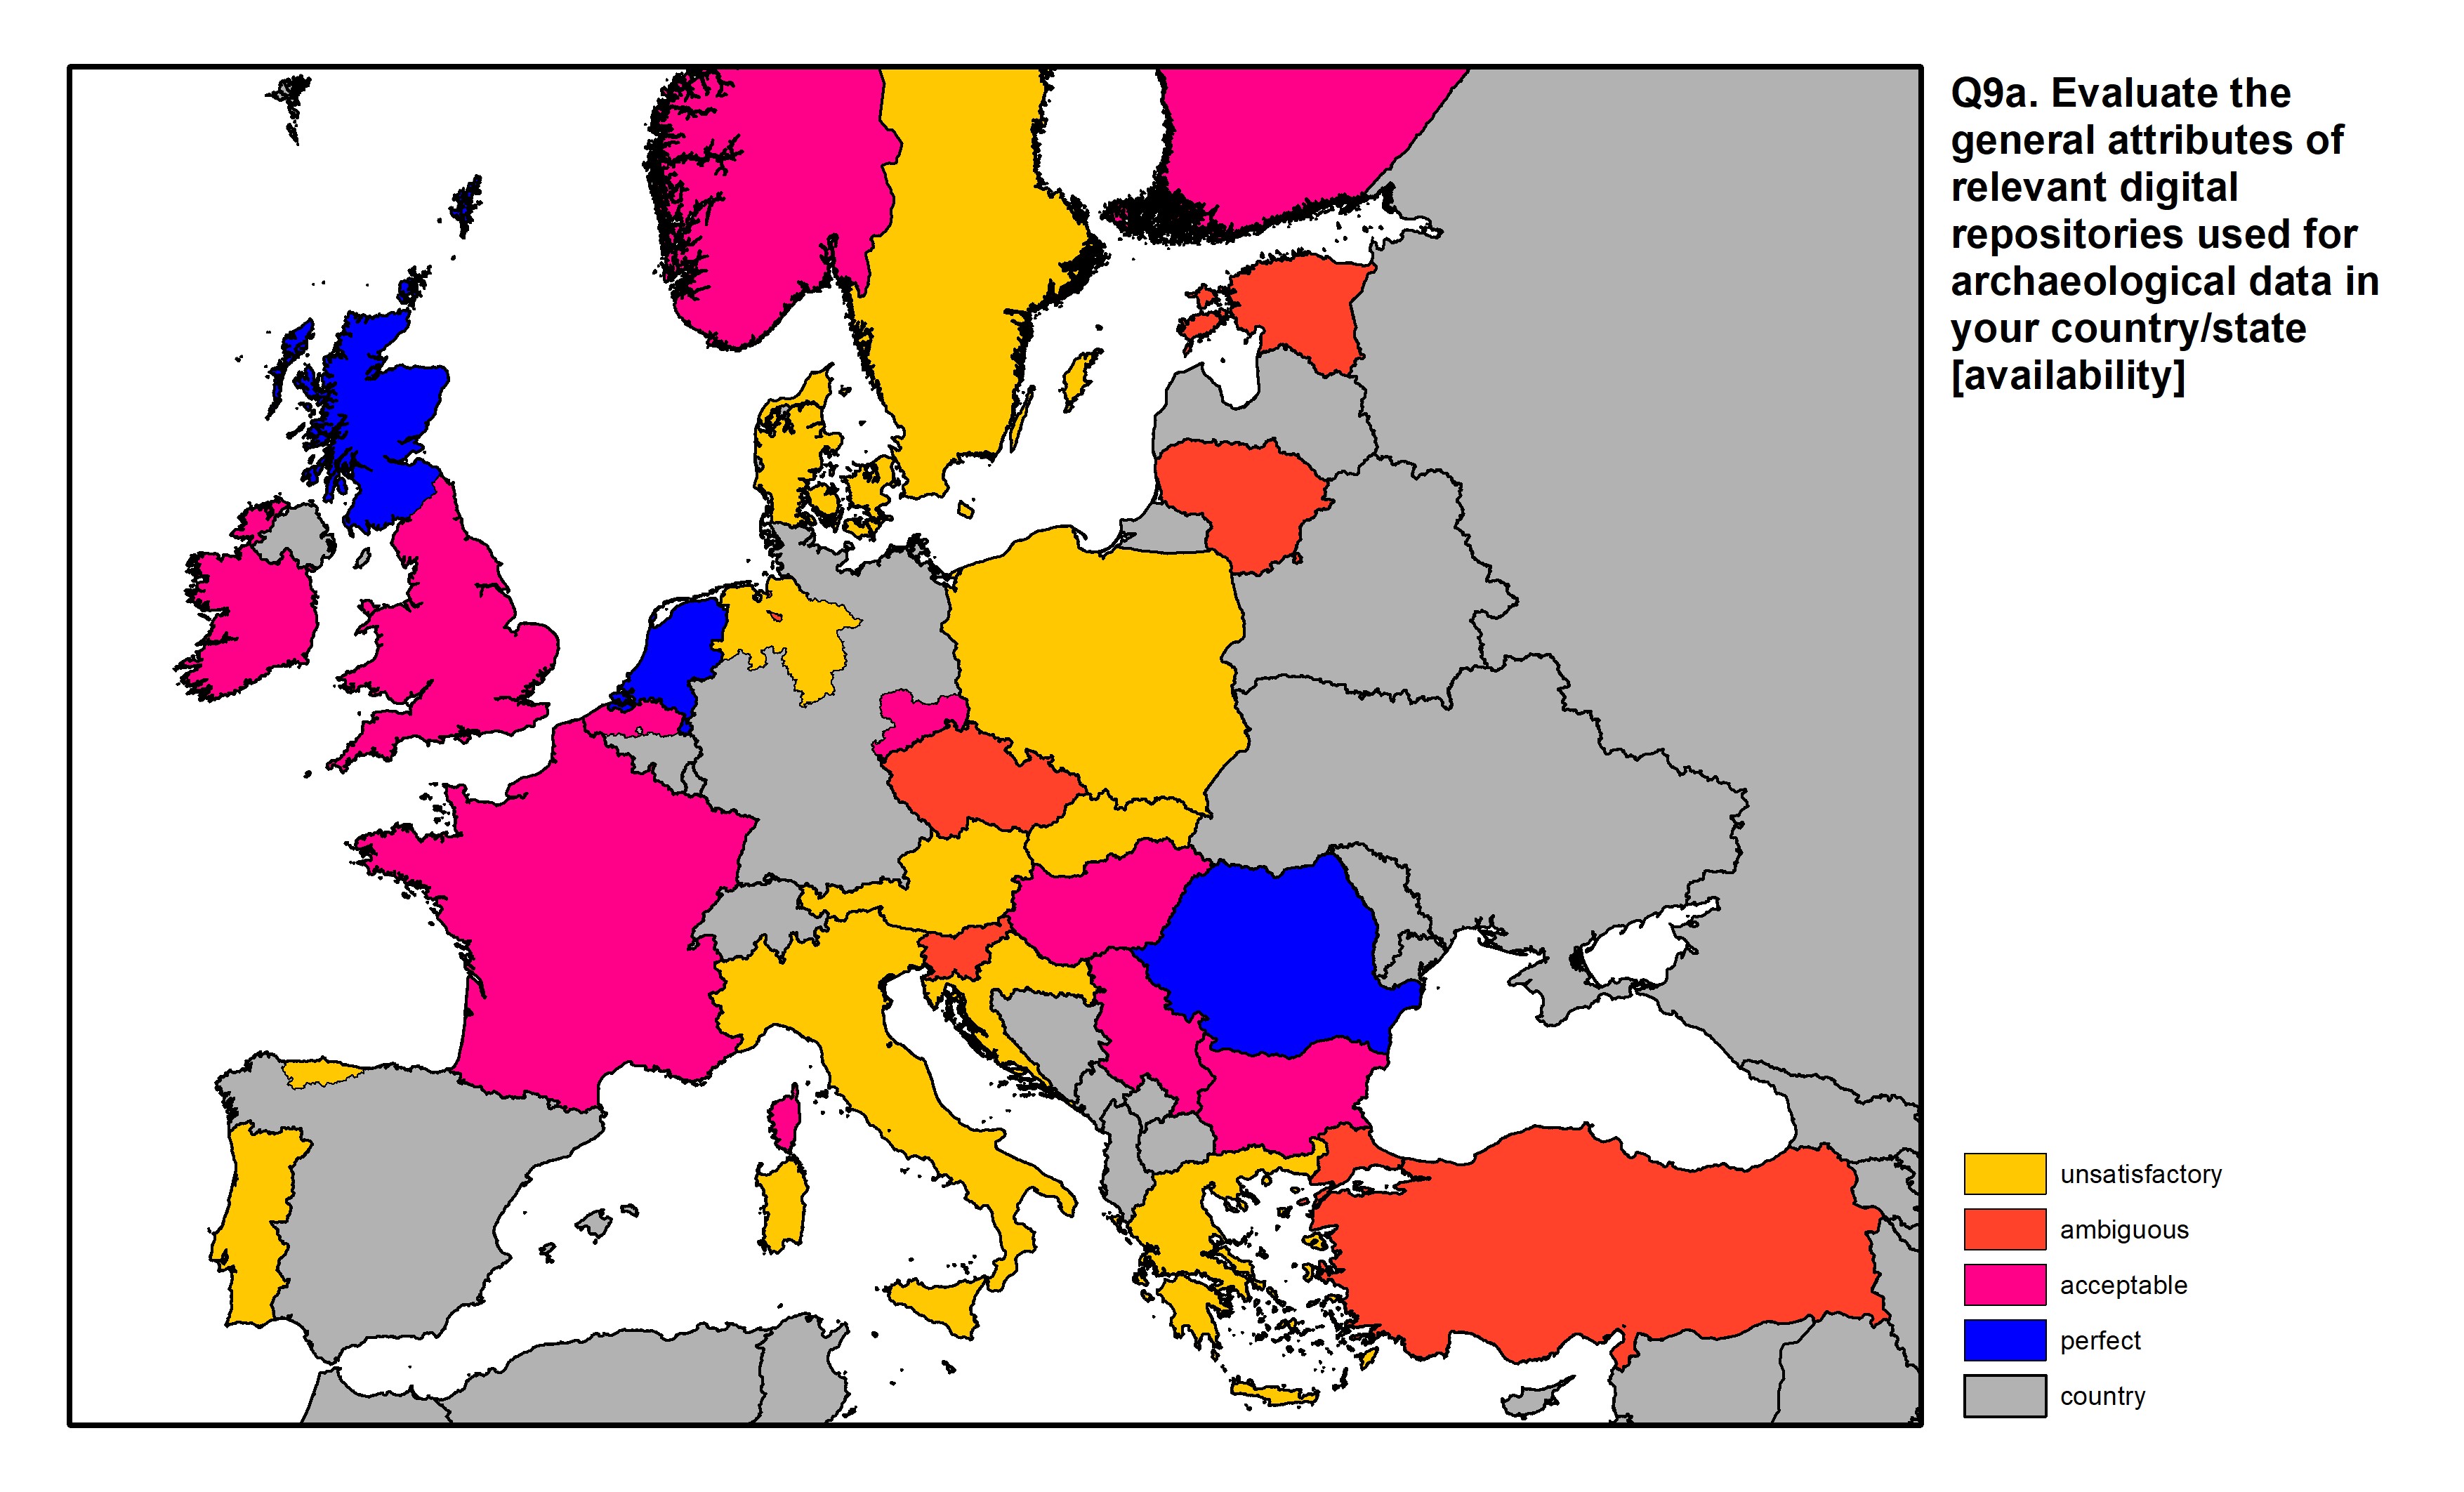 Figure 27: a map of Europe showing countries and regions in colour based on response rates to the survey question.